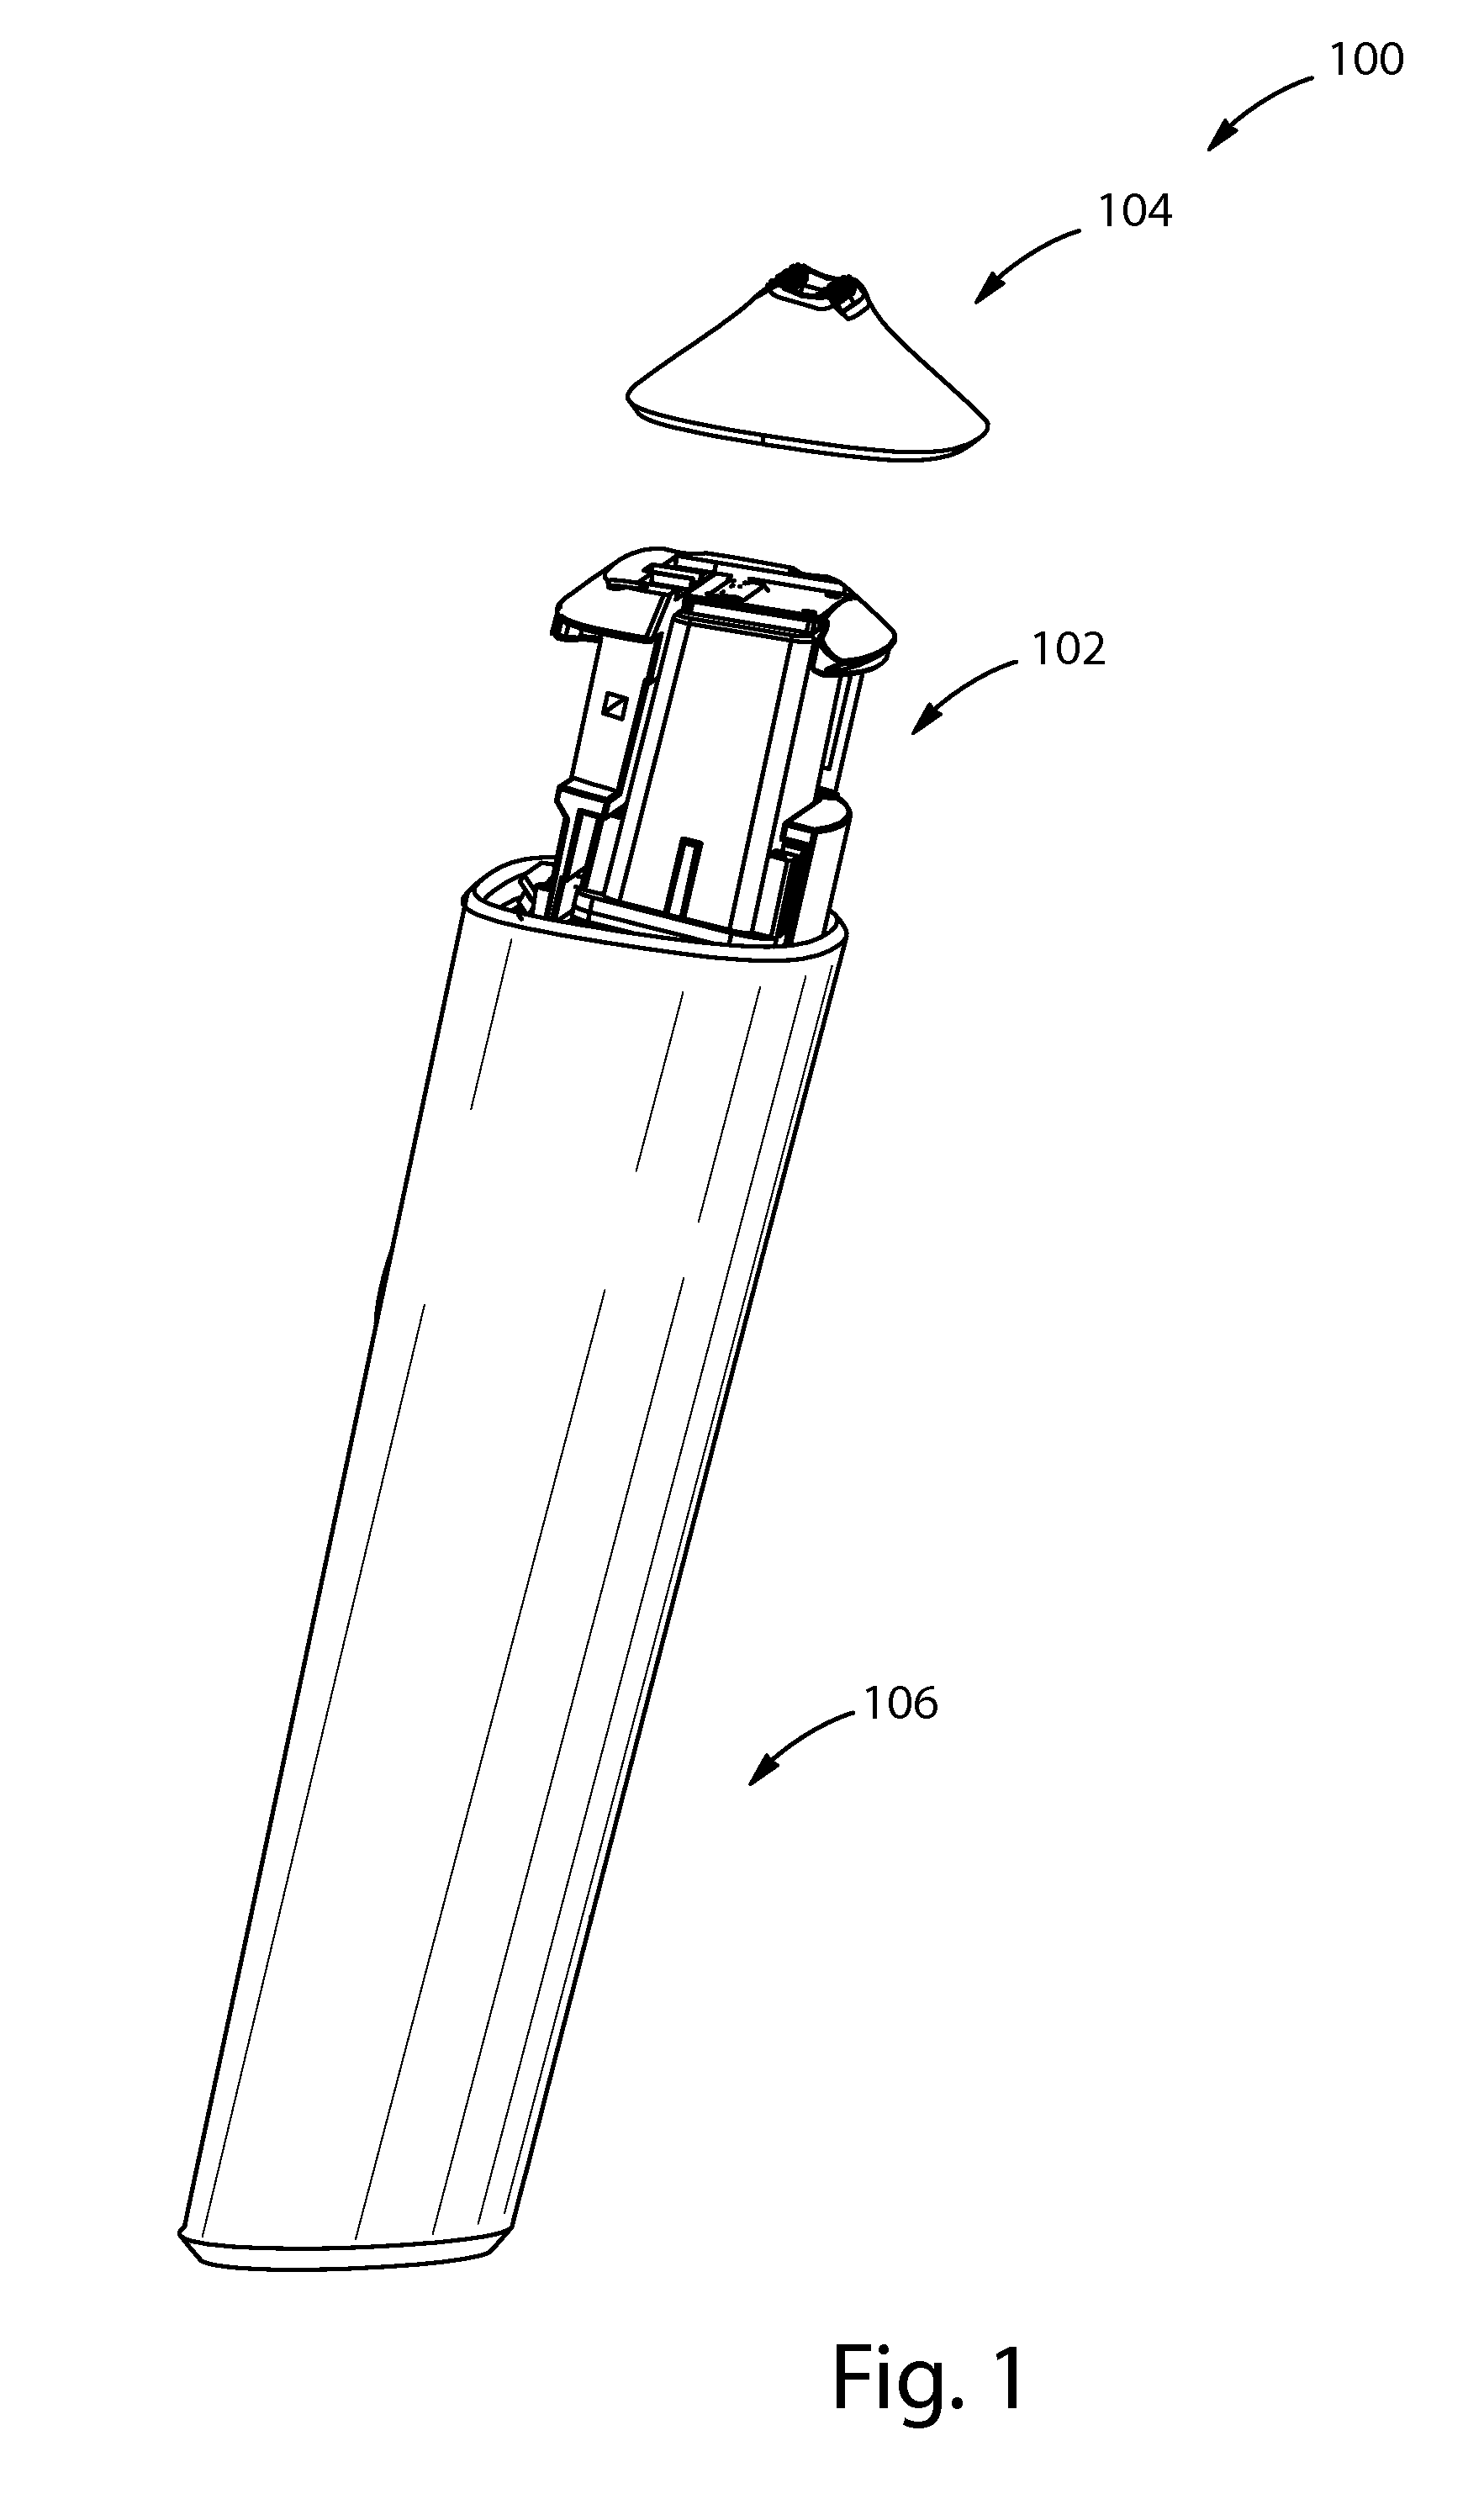 Angled cartridge assembly for a dispensing device